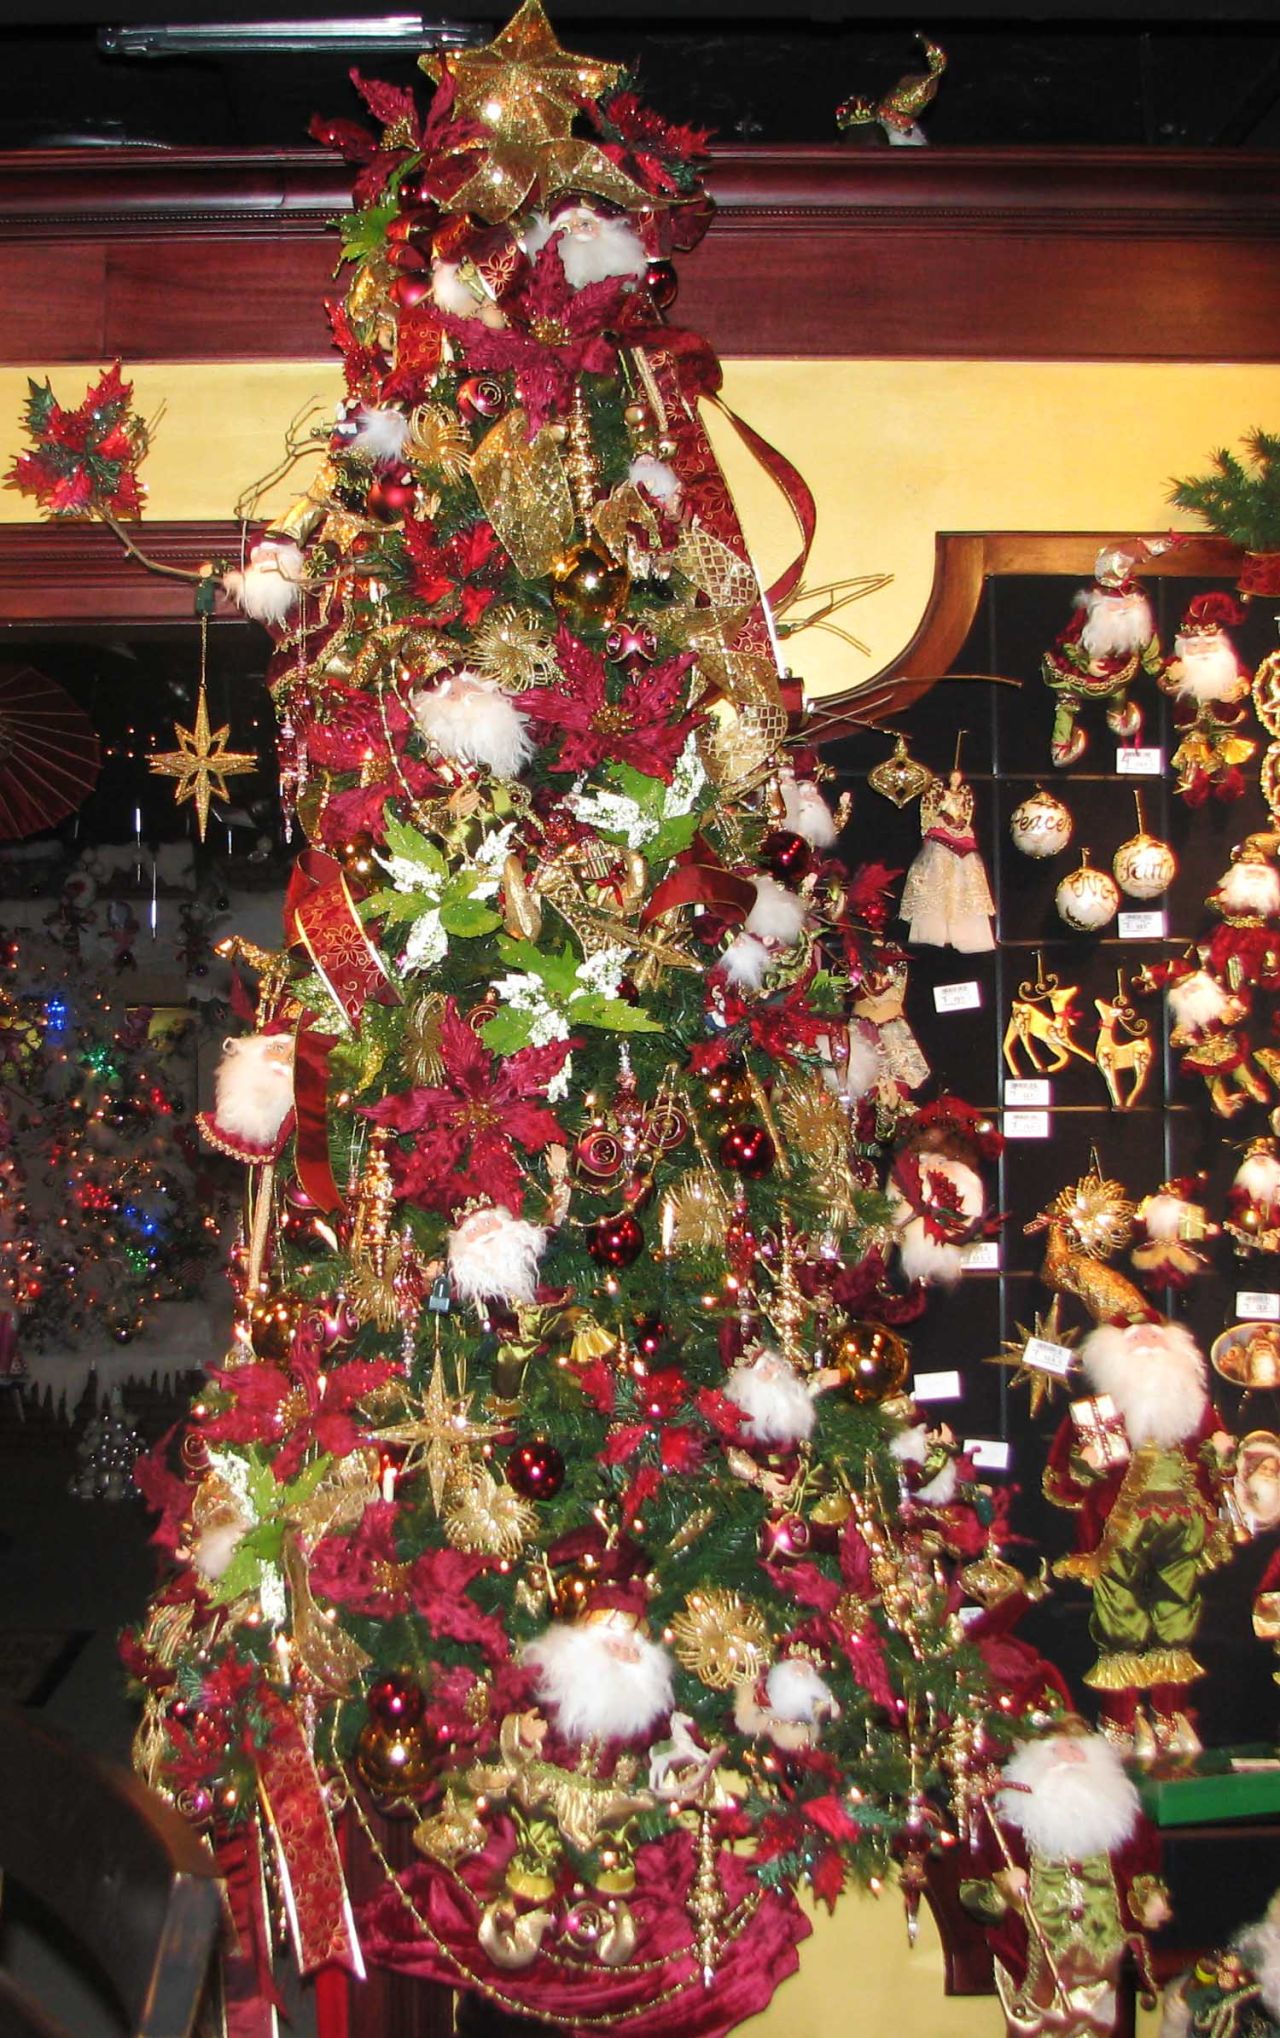 Experiement with different shades of traditional themes, like this burgundy and gold tree.